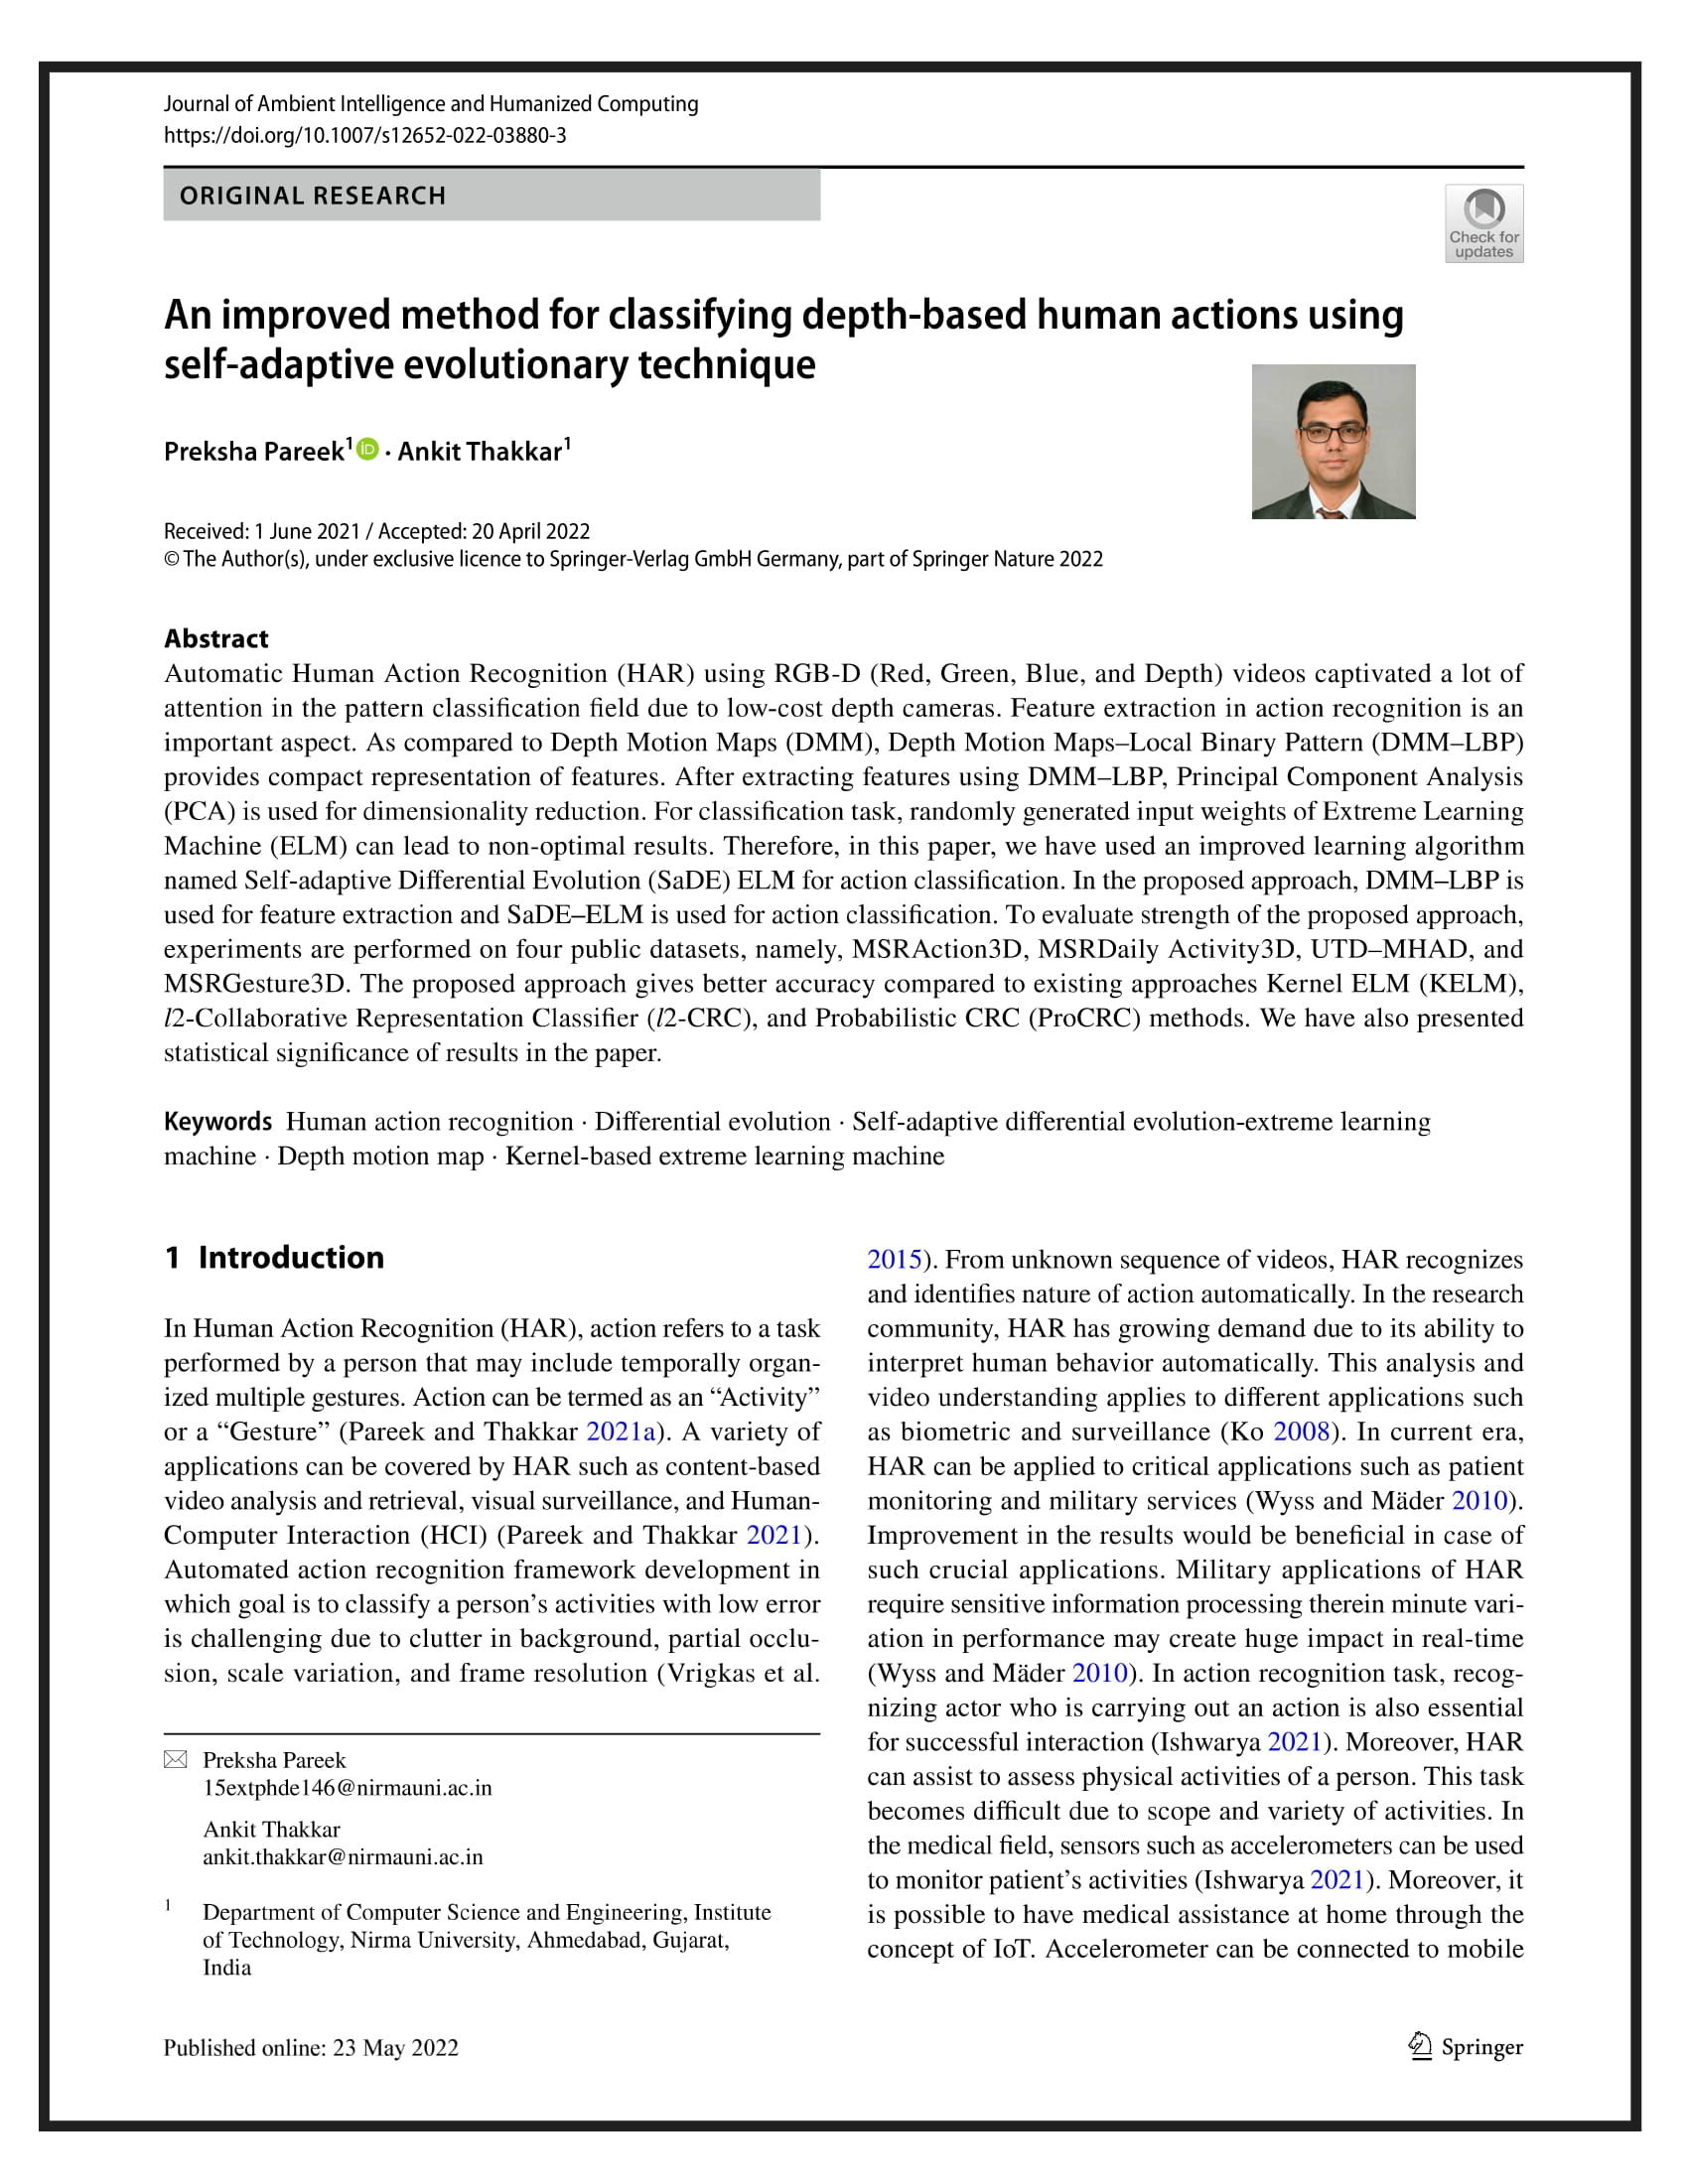 An improved method for classifying depth-based human actions using self-adaptive evolutionary technique